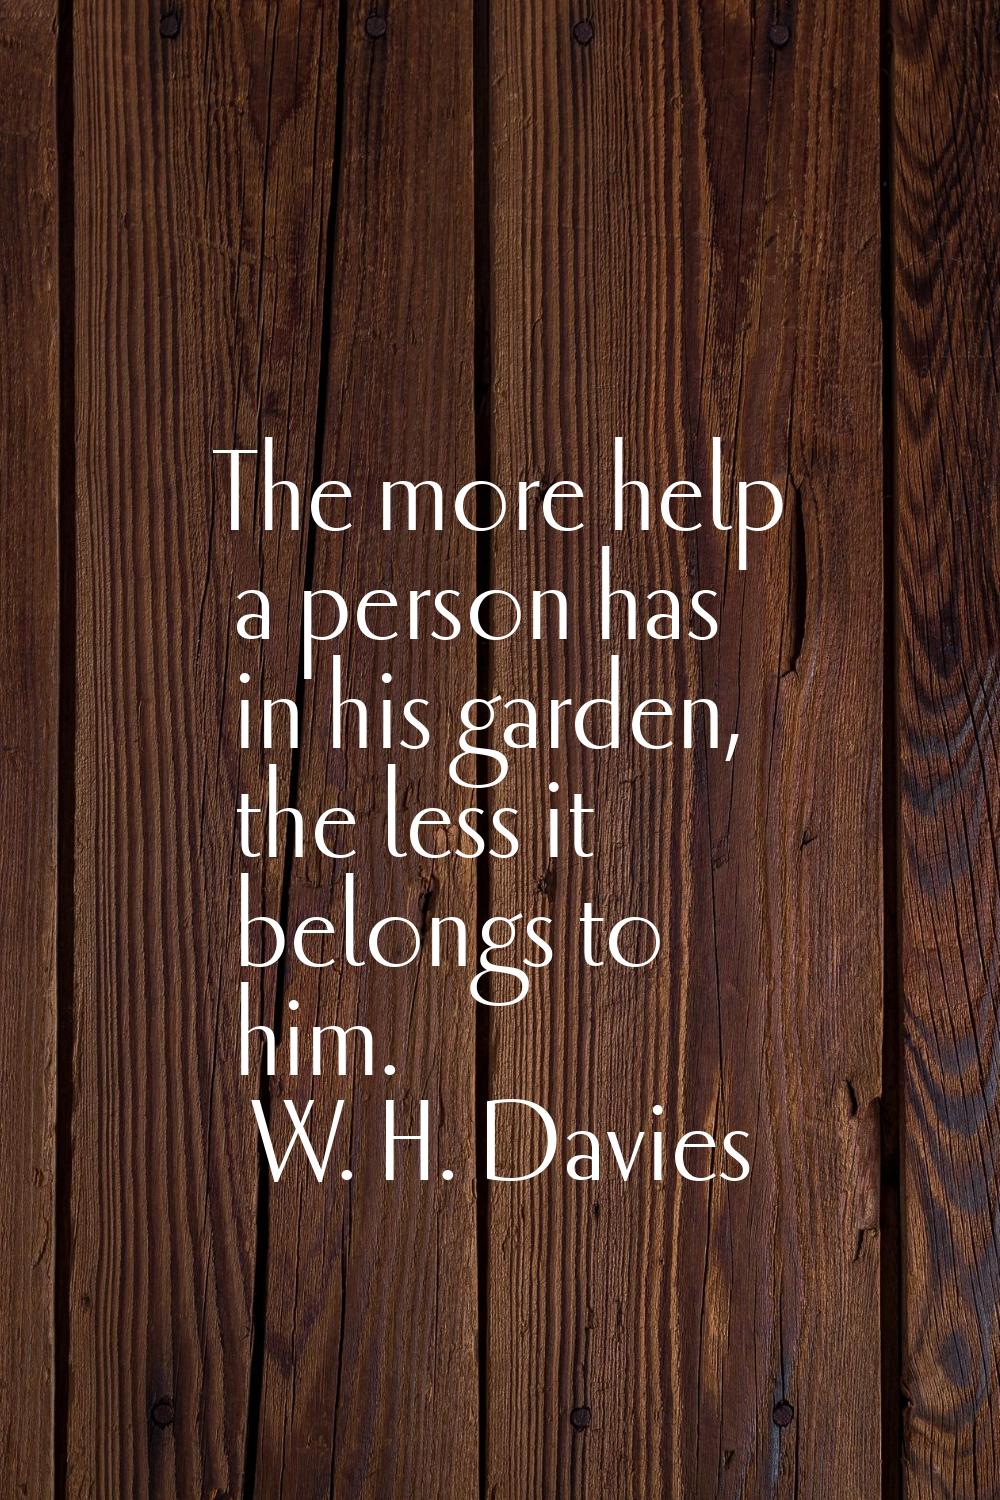 The more help a person has in his garden, the less it belongs to him.